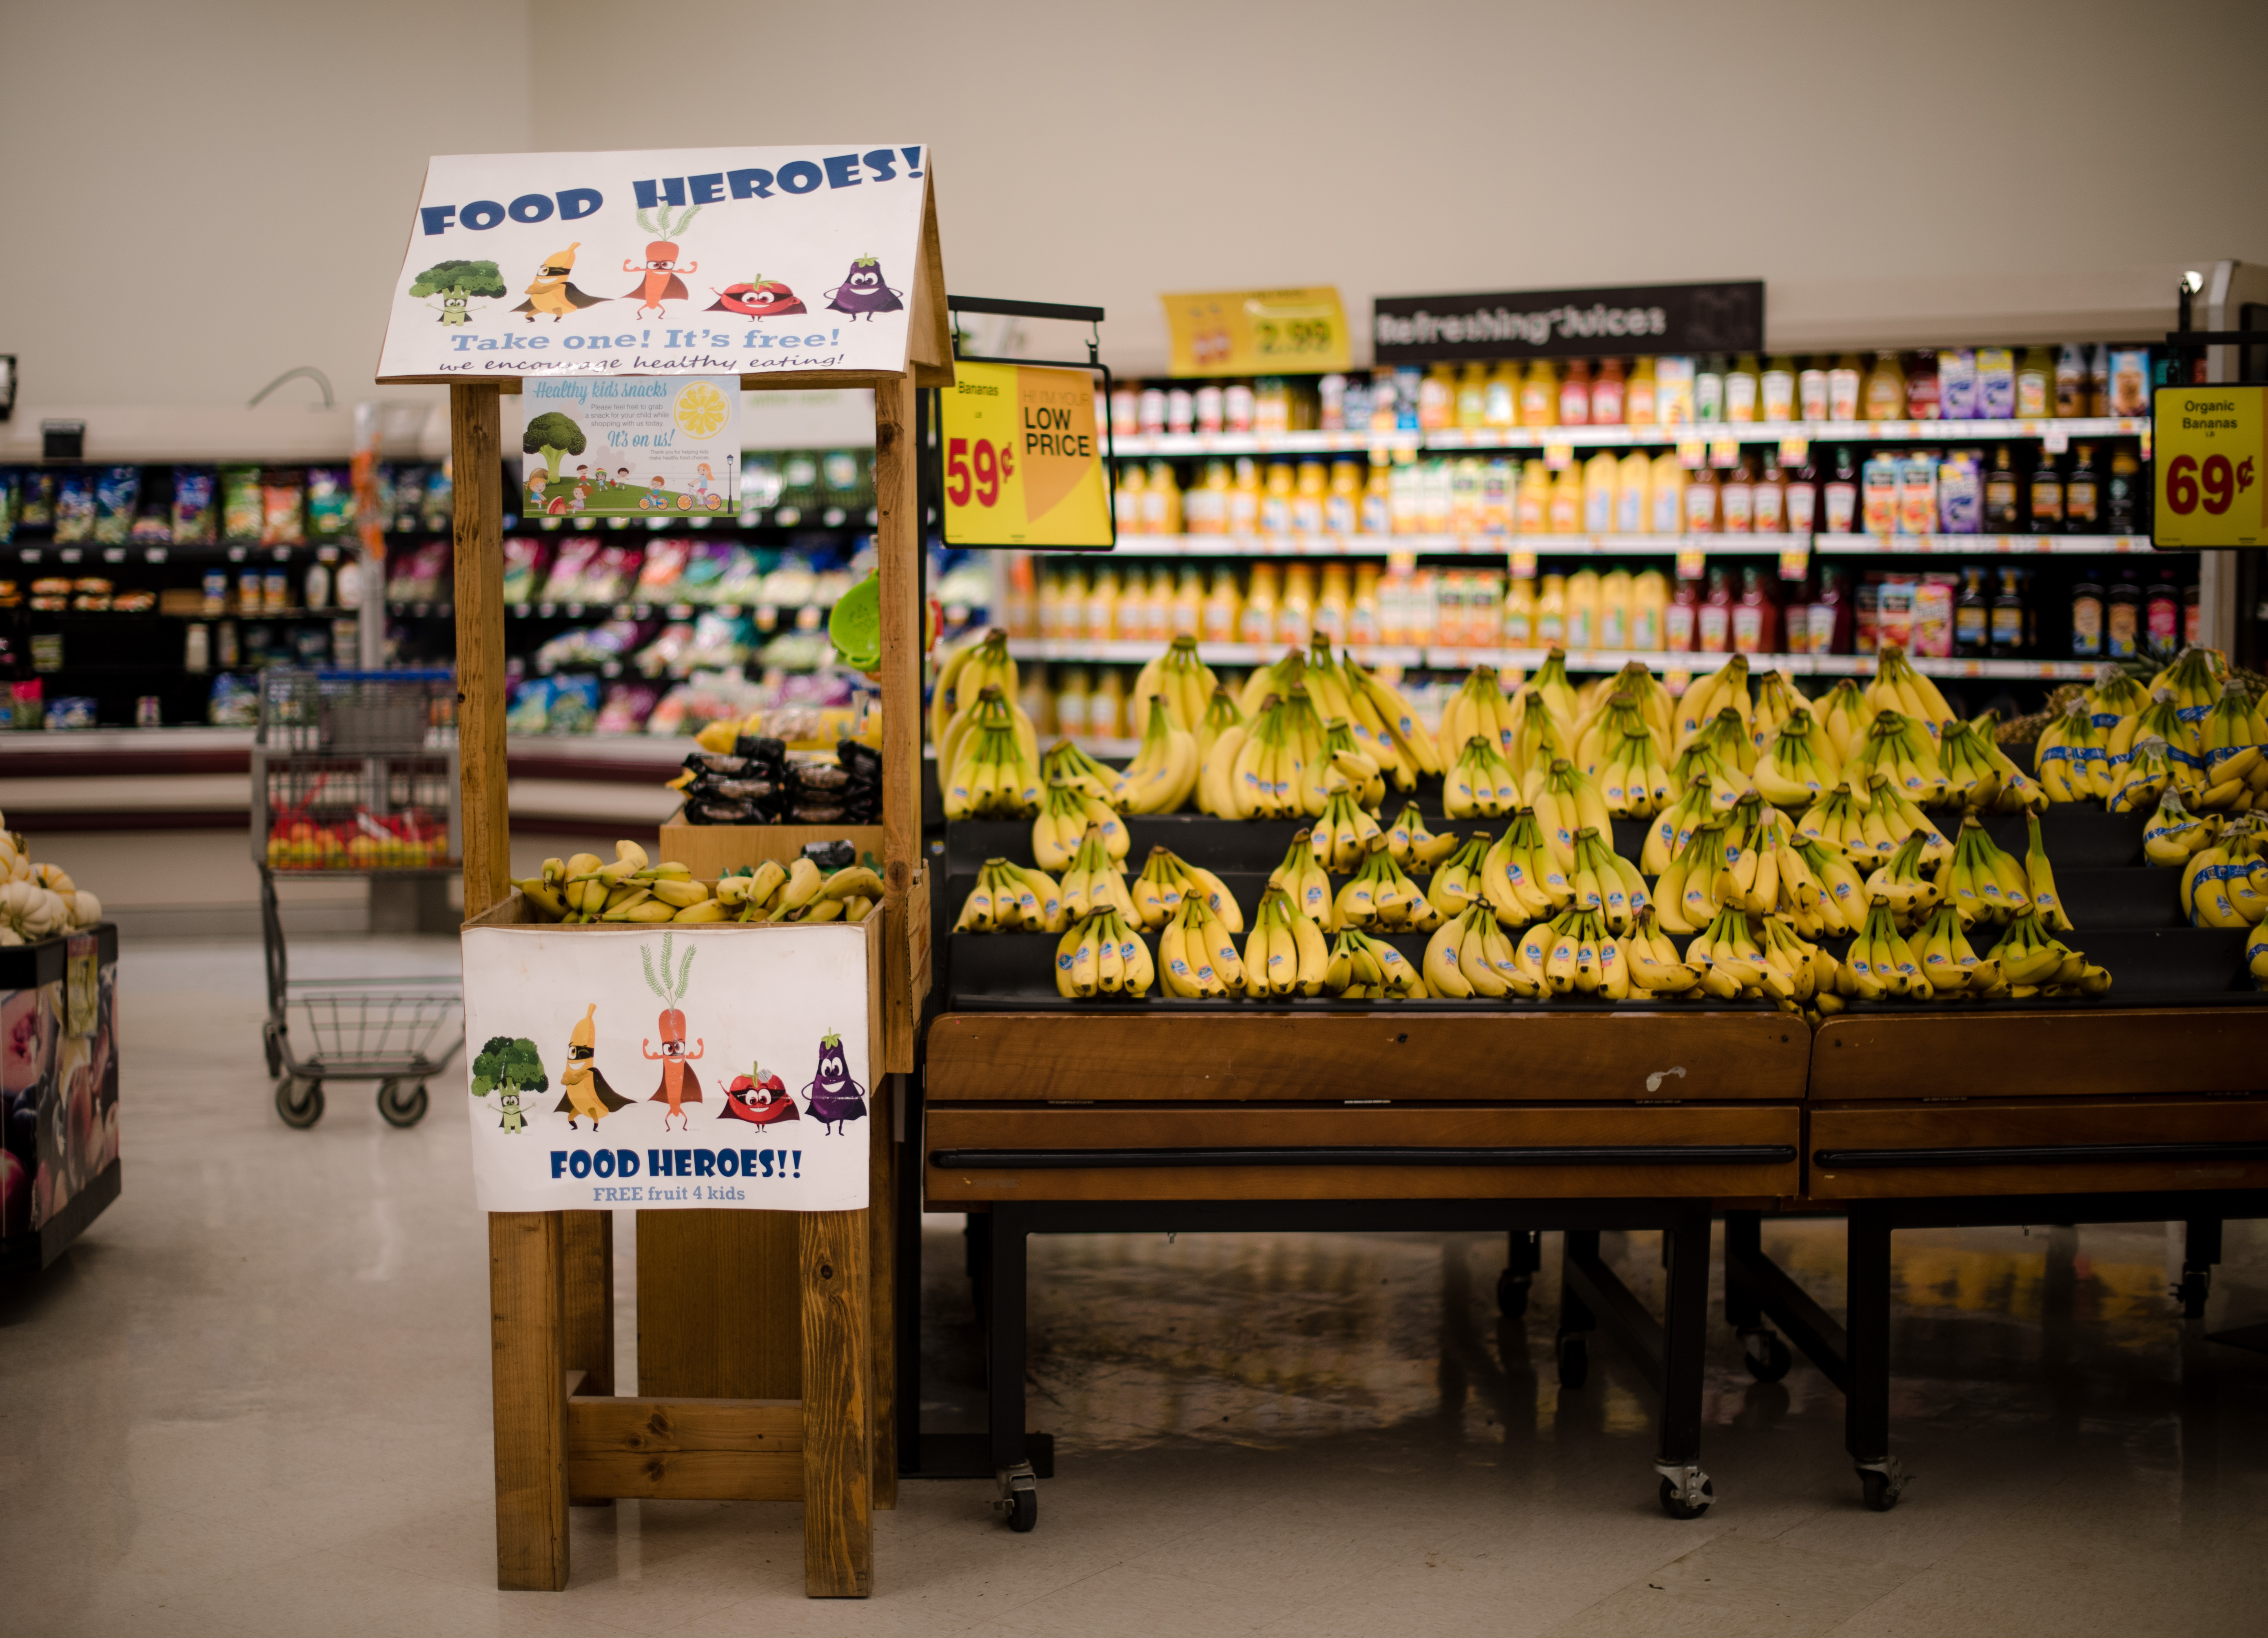 A permanent fruit stand was placed in City Market Grocery in Shiprock, New Mexico